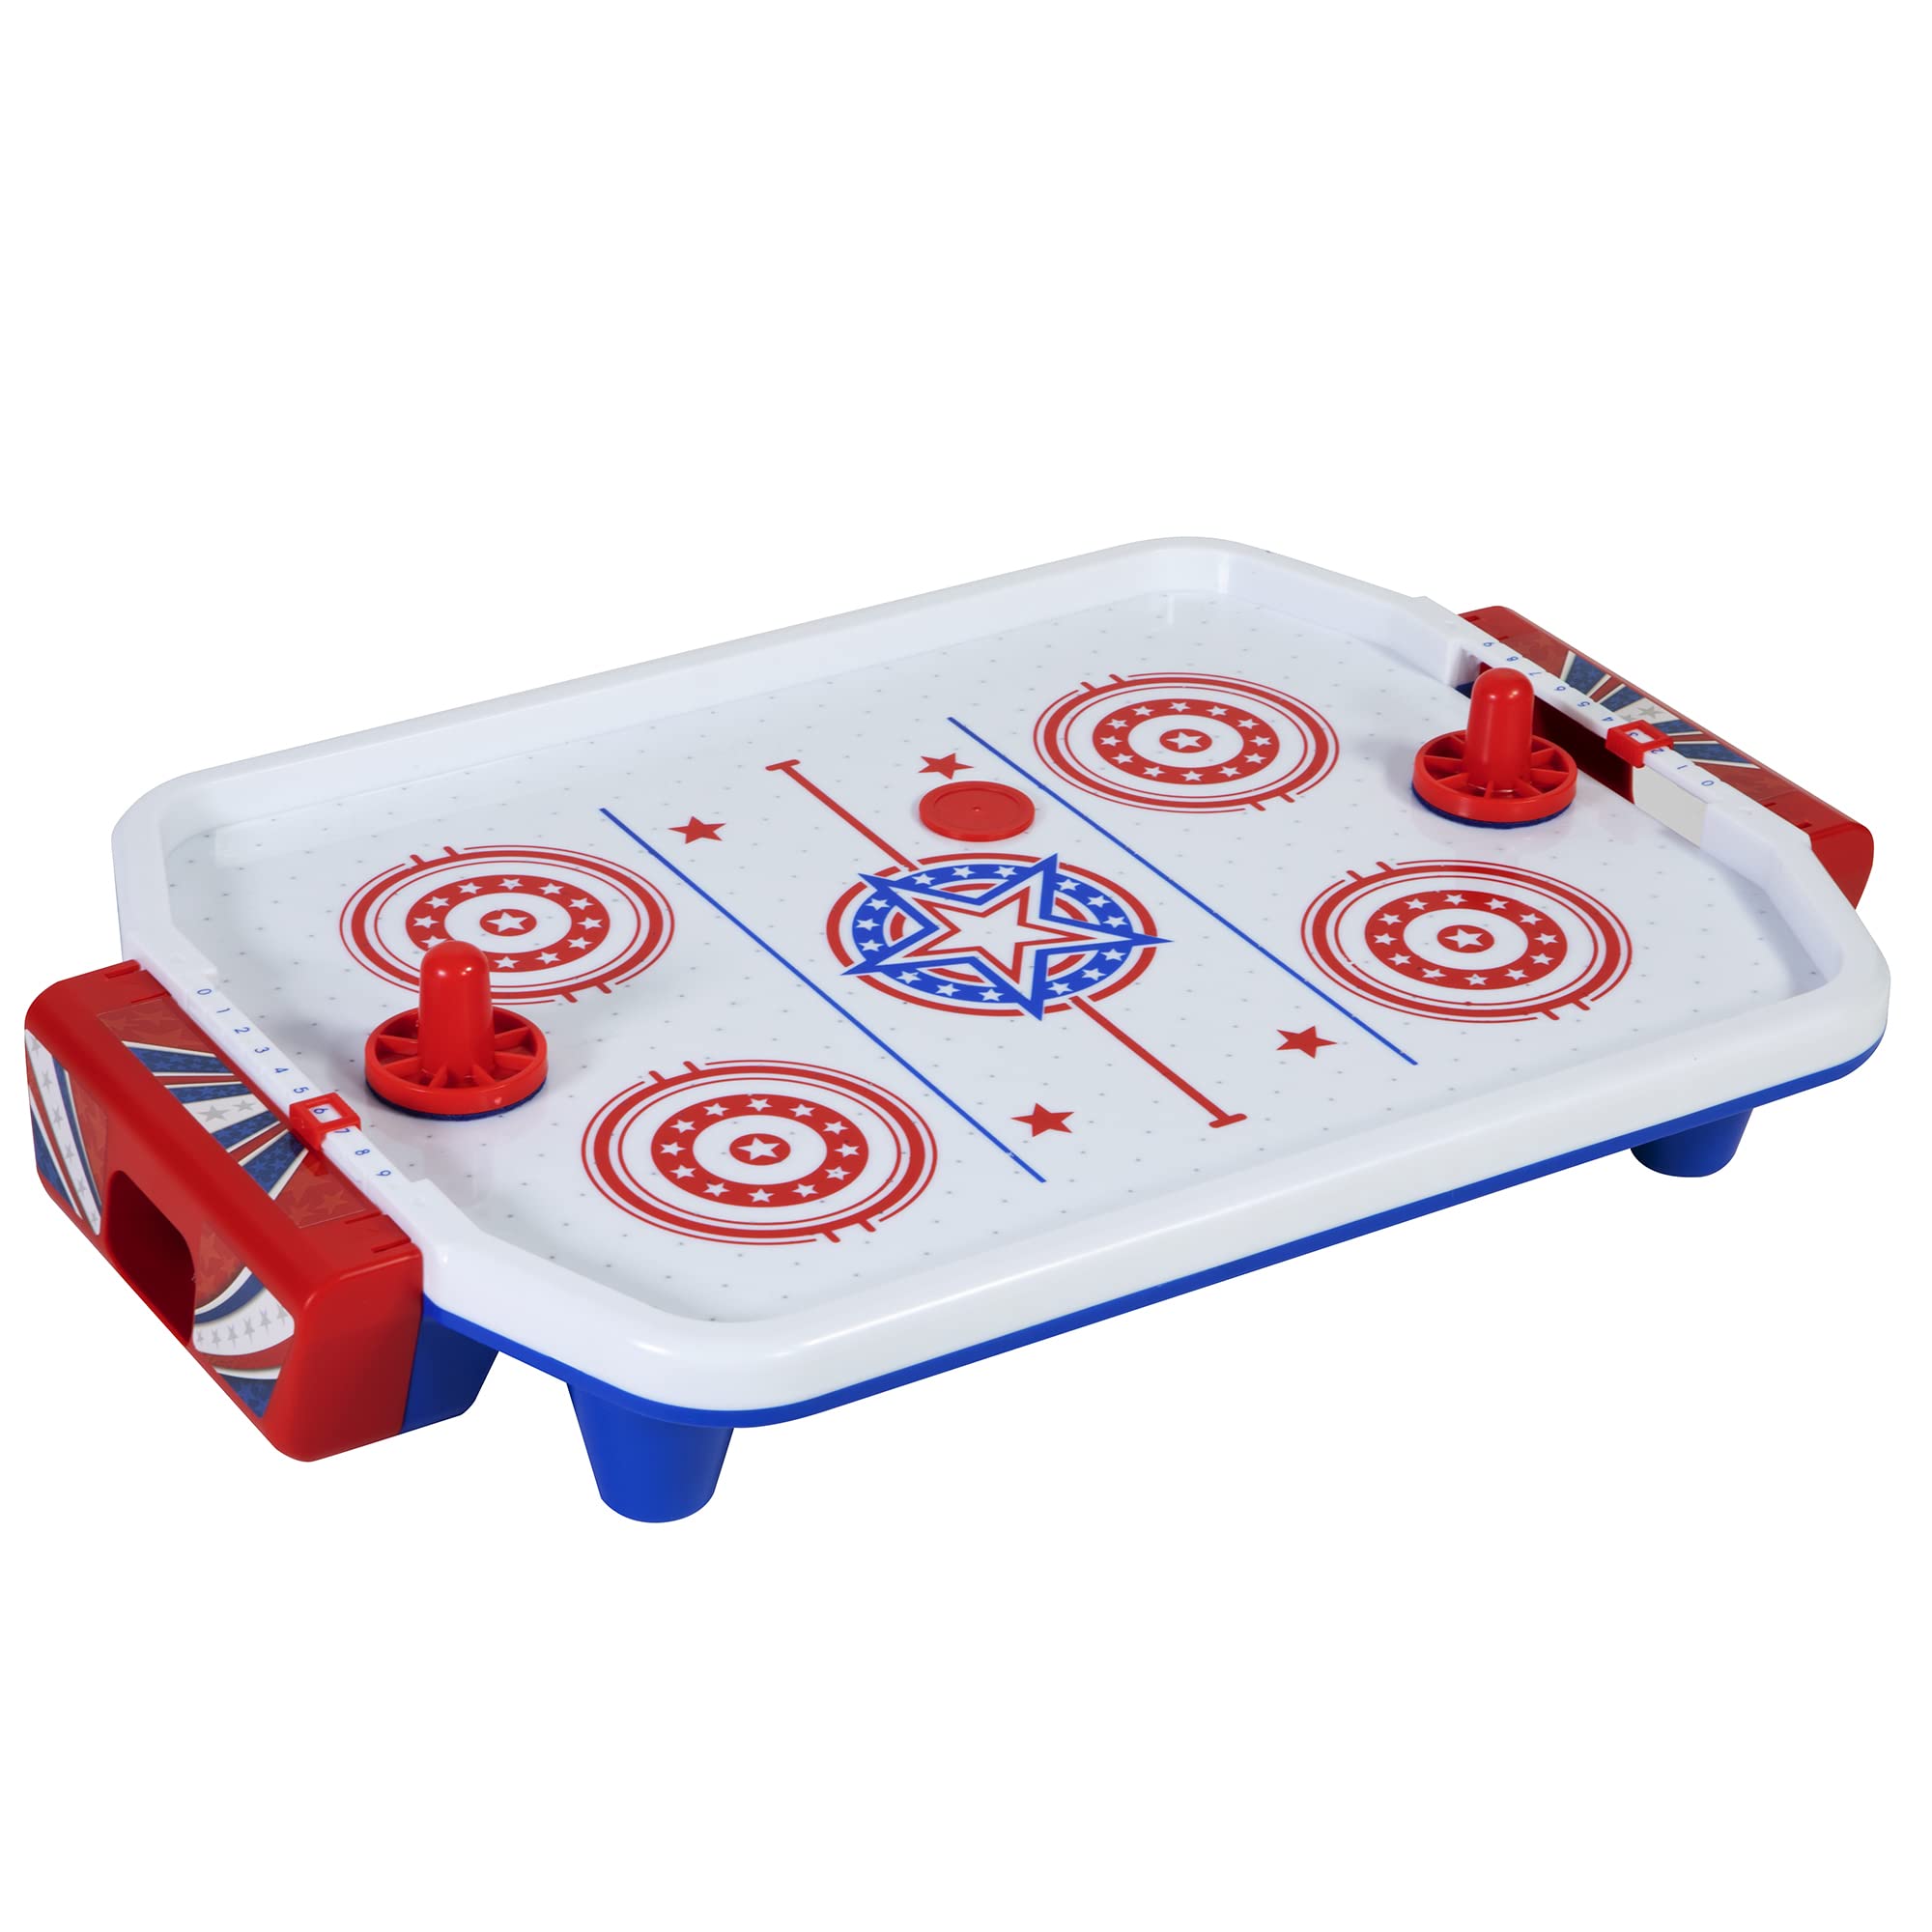 Retro Arcade Electronic: Air Hockey - Tabletop Game, Powerful Airflow, 2 Players, Ages 6+